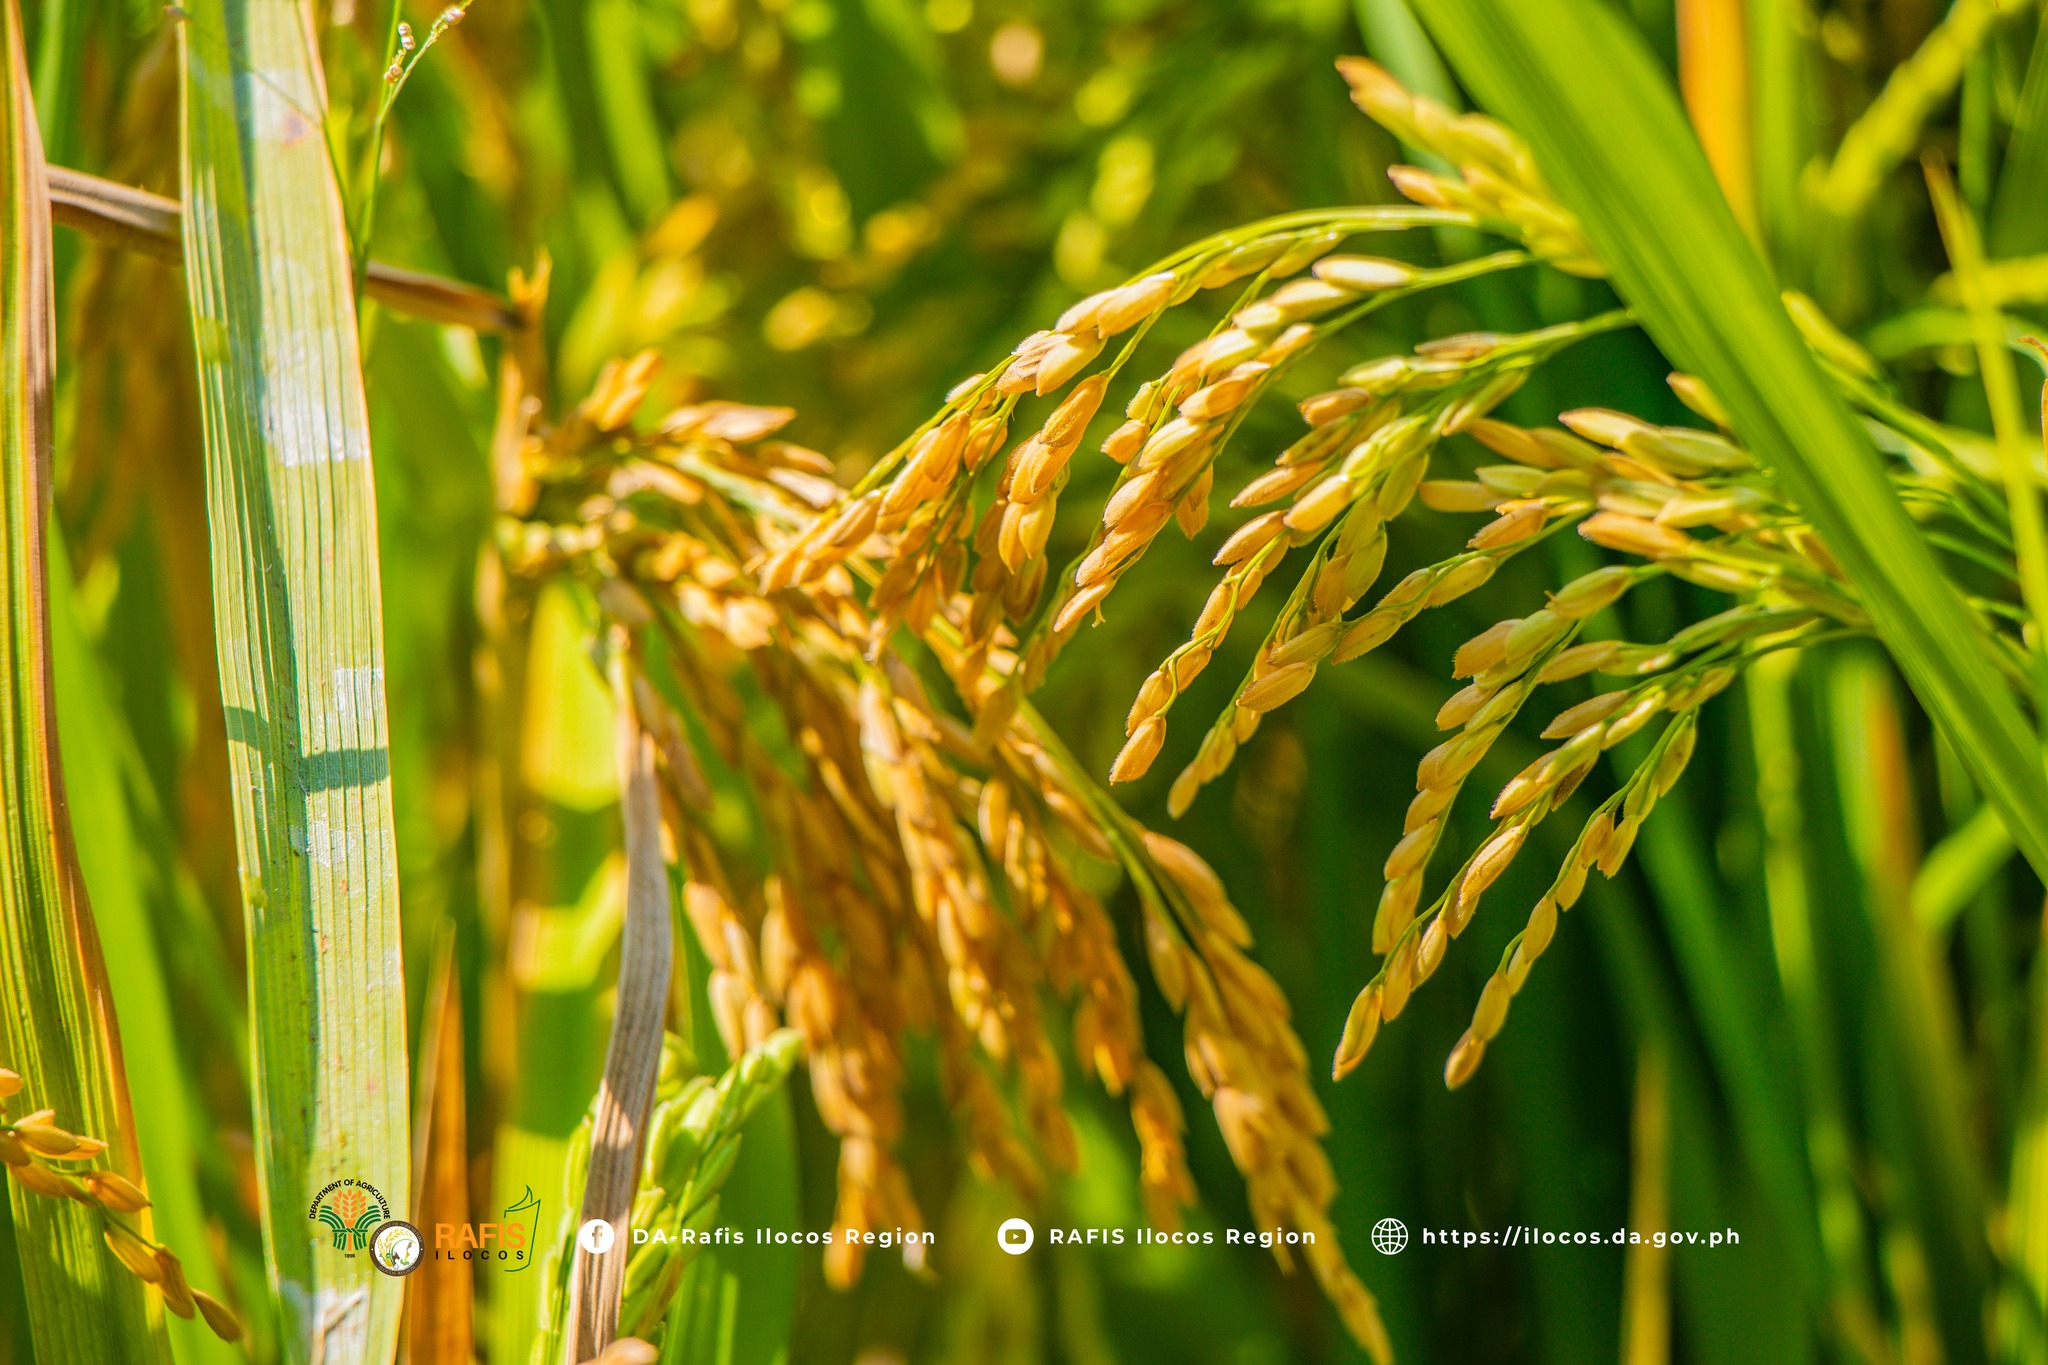 Provincial Rice Technology forum yields results; top performing rice varieties showcased among farmers